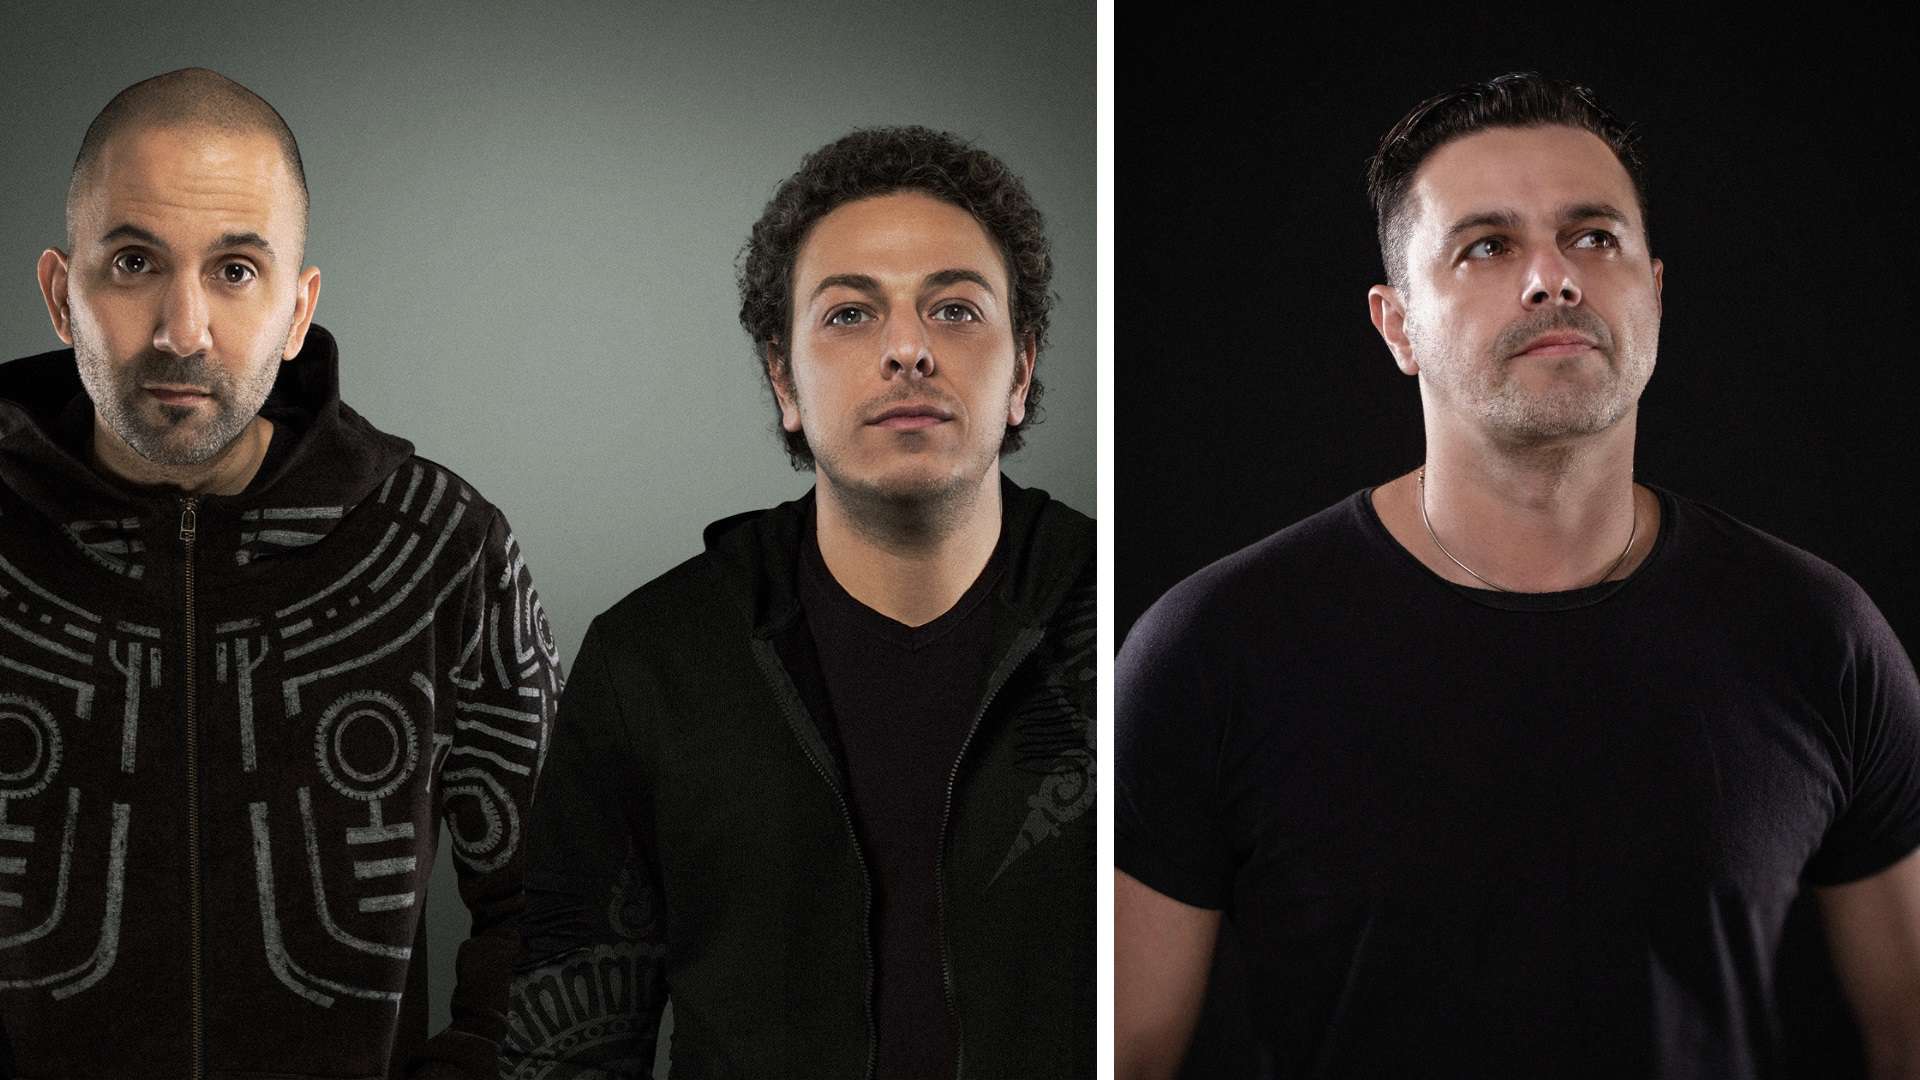 Vini Vici team up with Ghost Rider for feel-good single ‘Easy Ride’ feat. Wylde: Listen